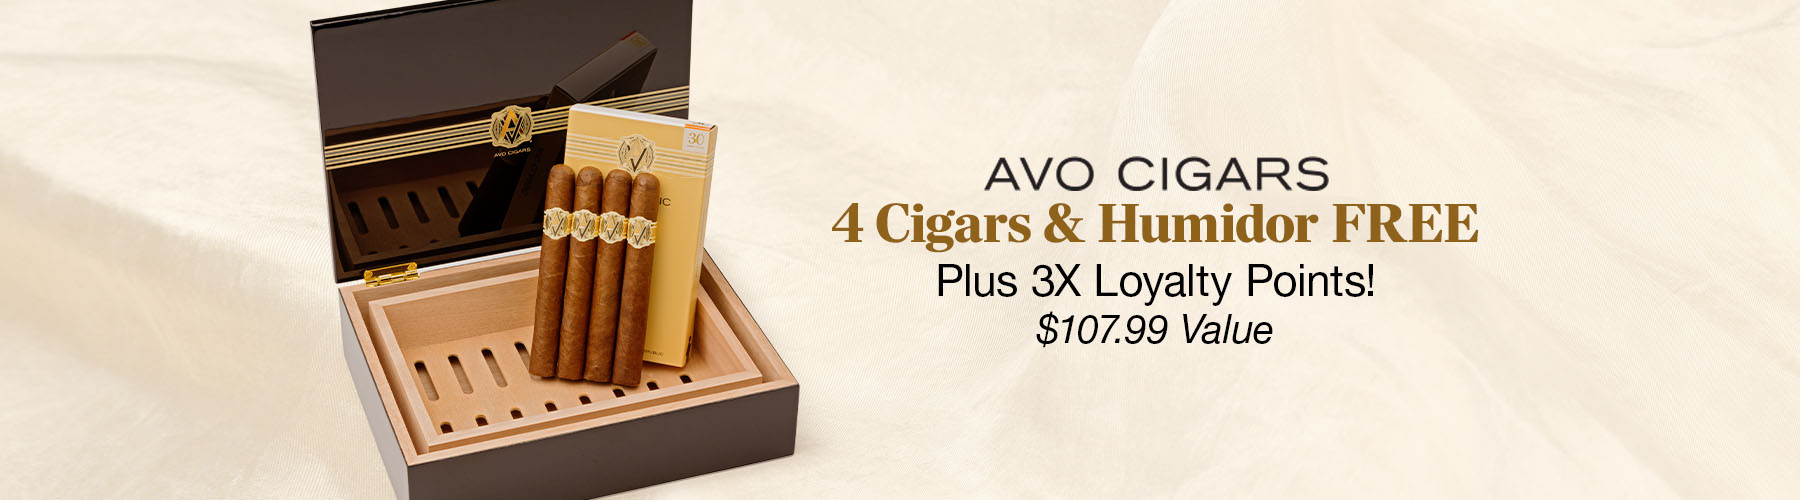 5 Cigars & Humidor Free with AVO plus 3X the Loyalty Points! 
$107.99 Value